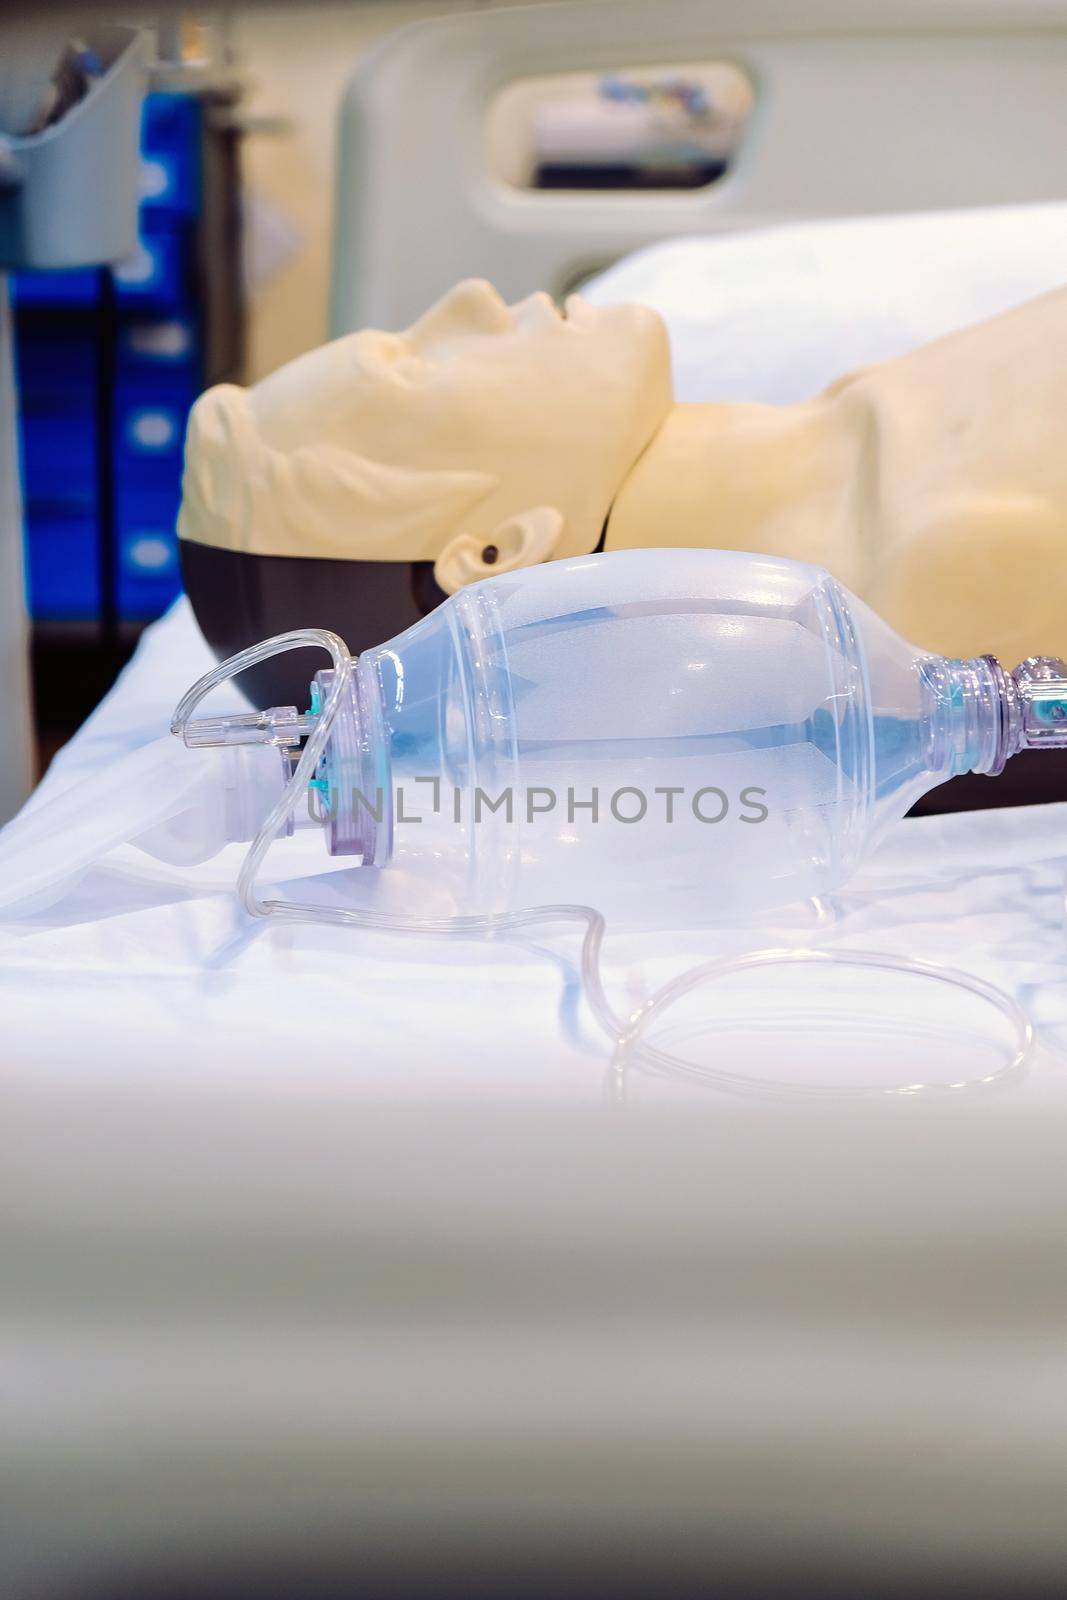 Image of CPR dummy with defibrillator